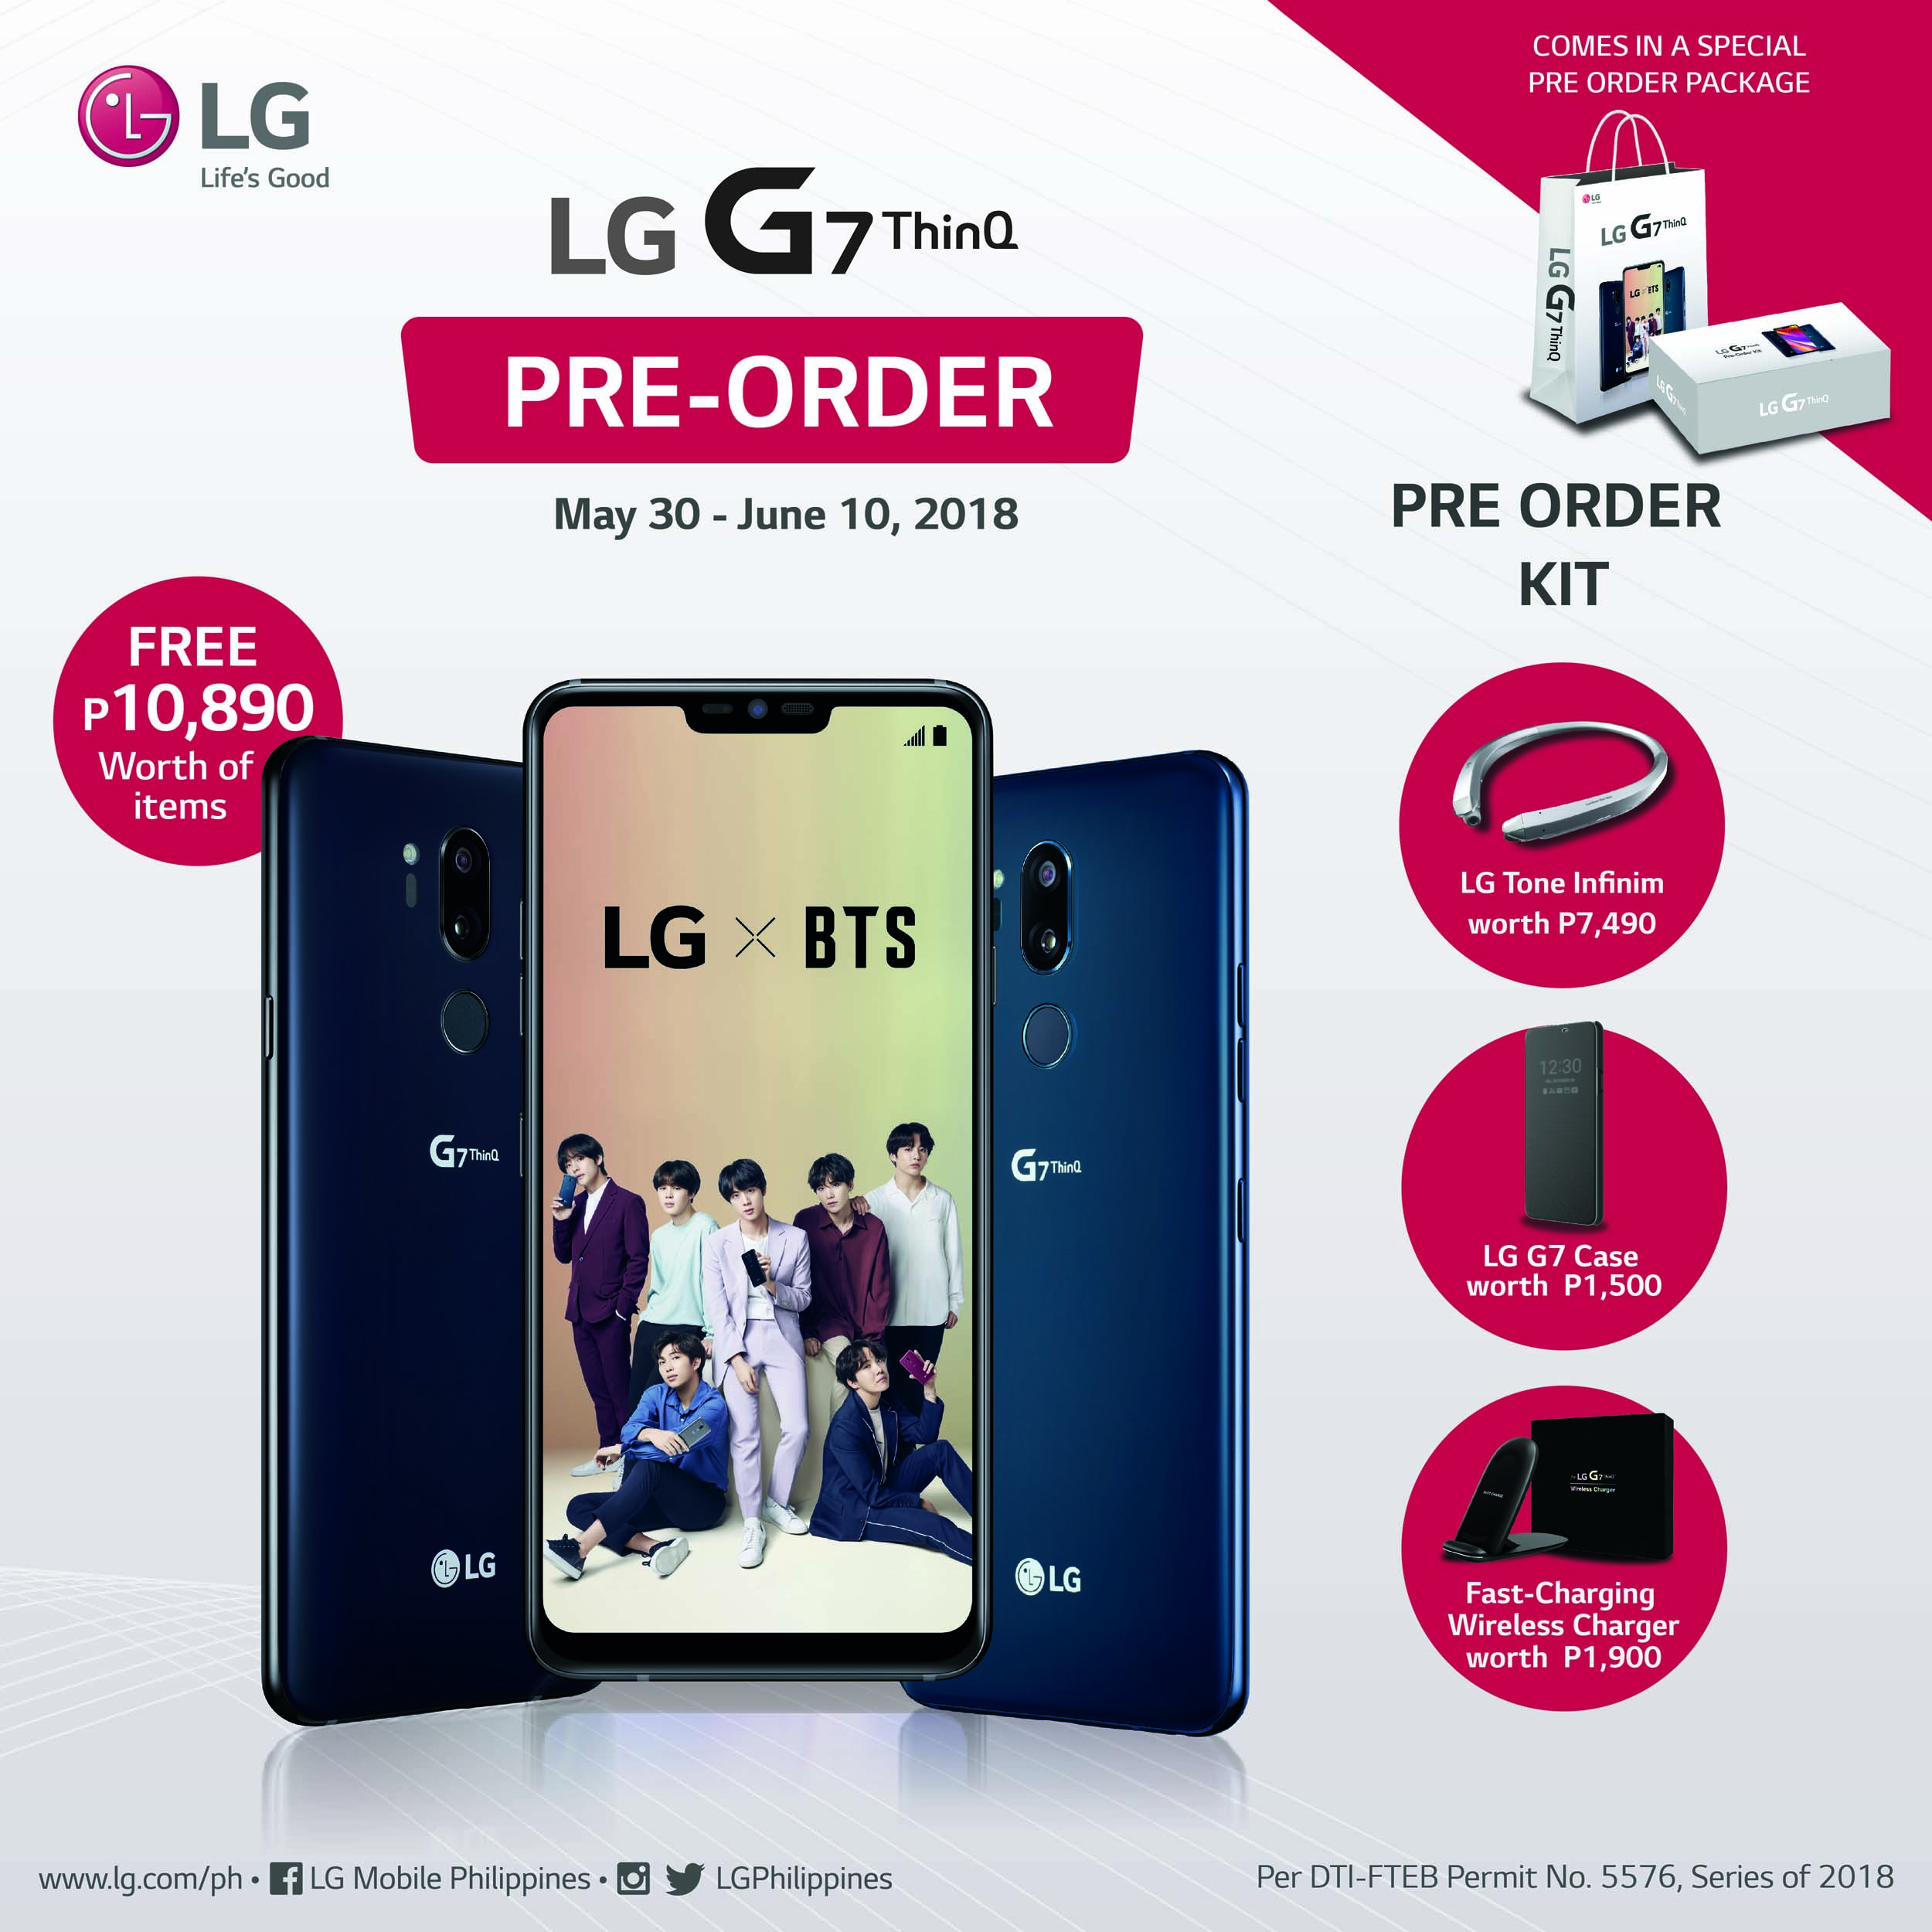 PRE-ORDER YOUR LG G7 ThinQ NOW